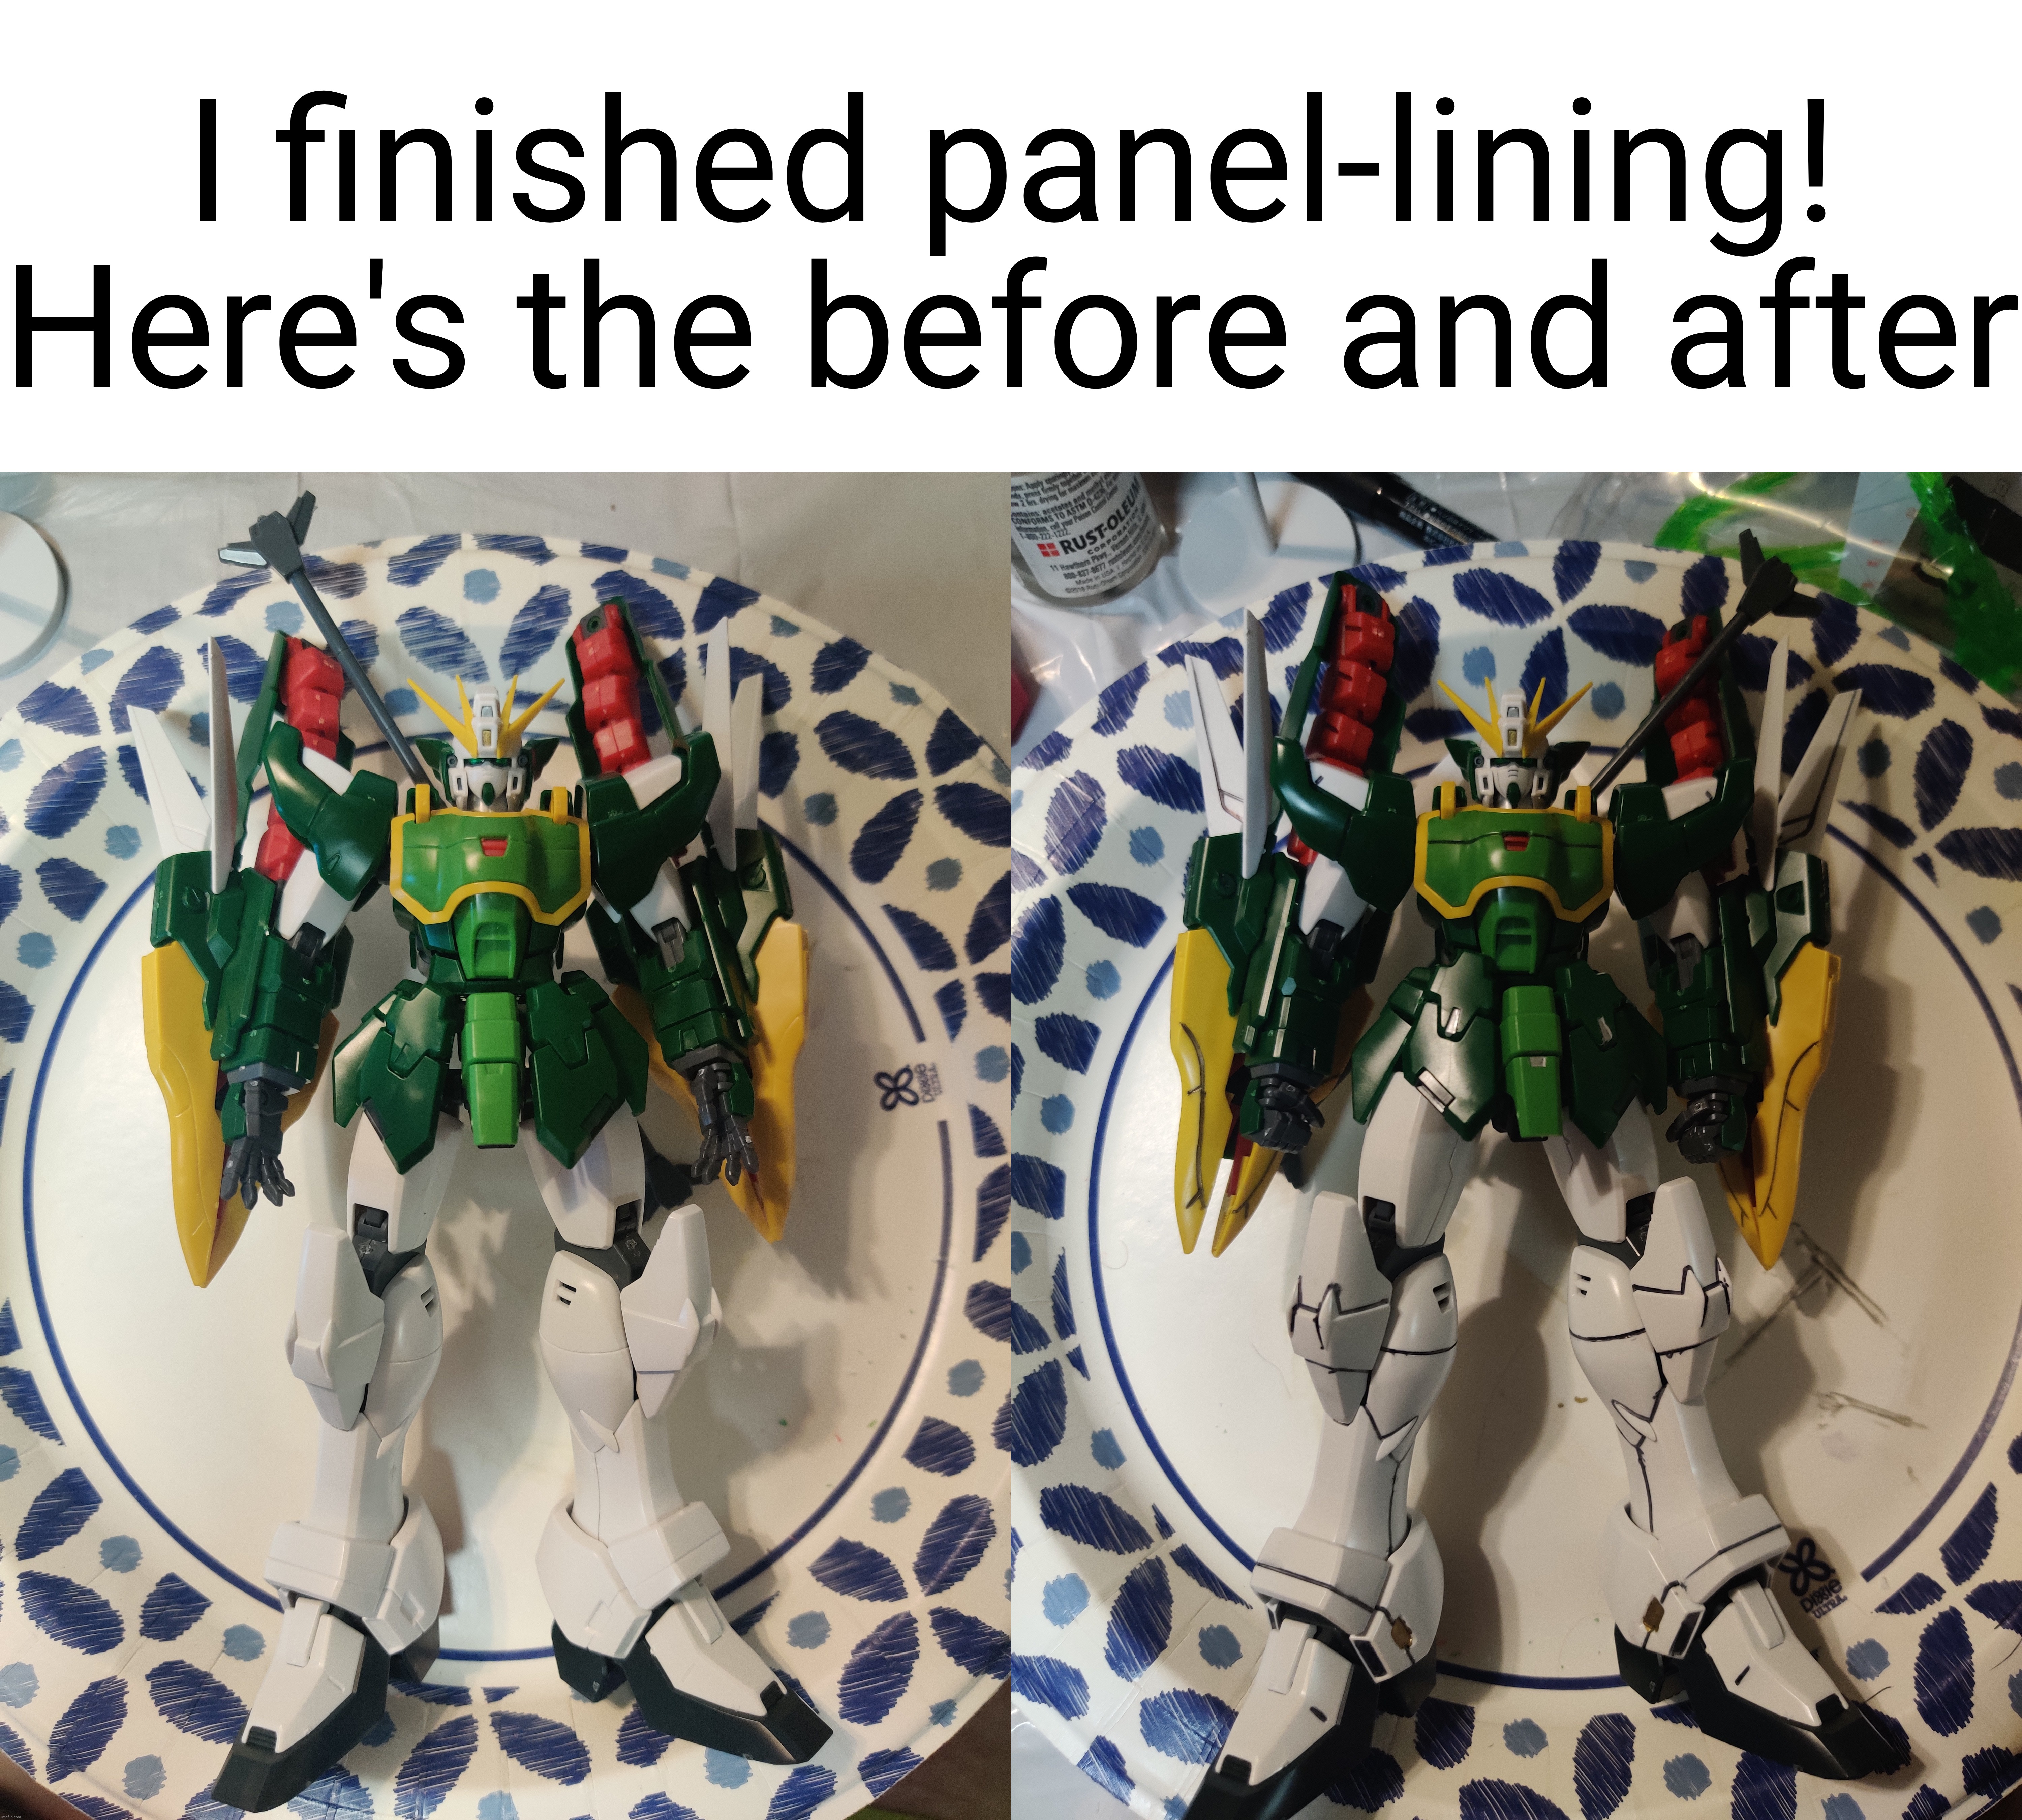 I also added some silver and gold to the waist and ankle armor | I finished panel-lining! Here's the before and after | made w/ Imgflip meme maker